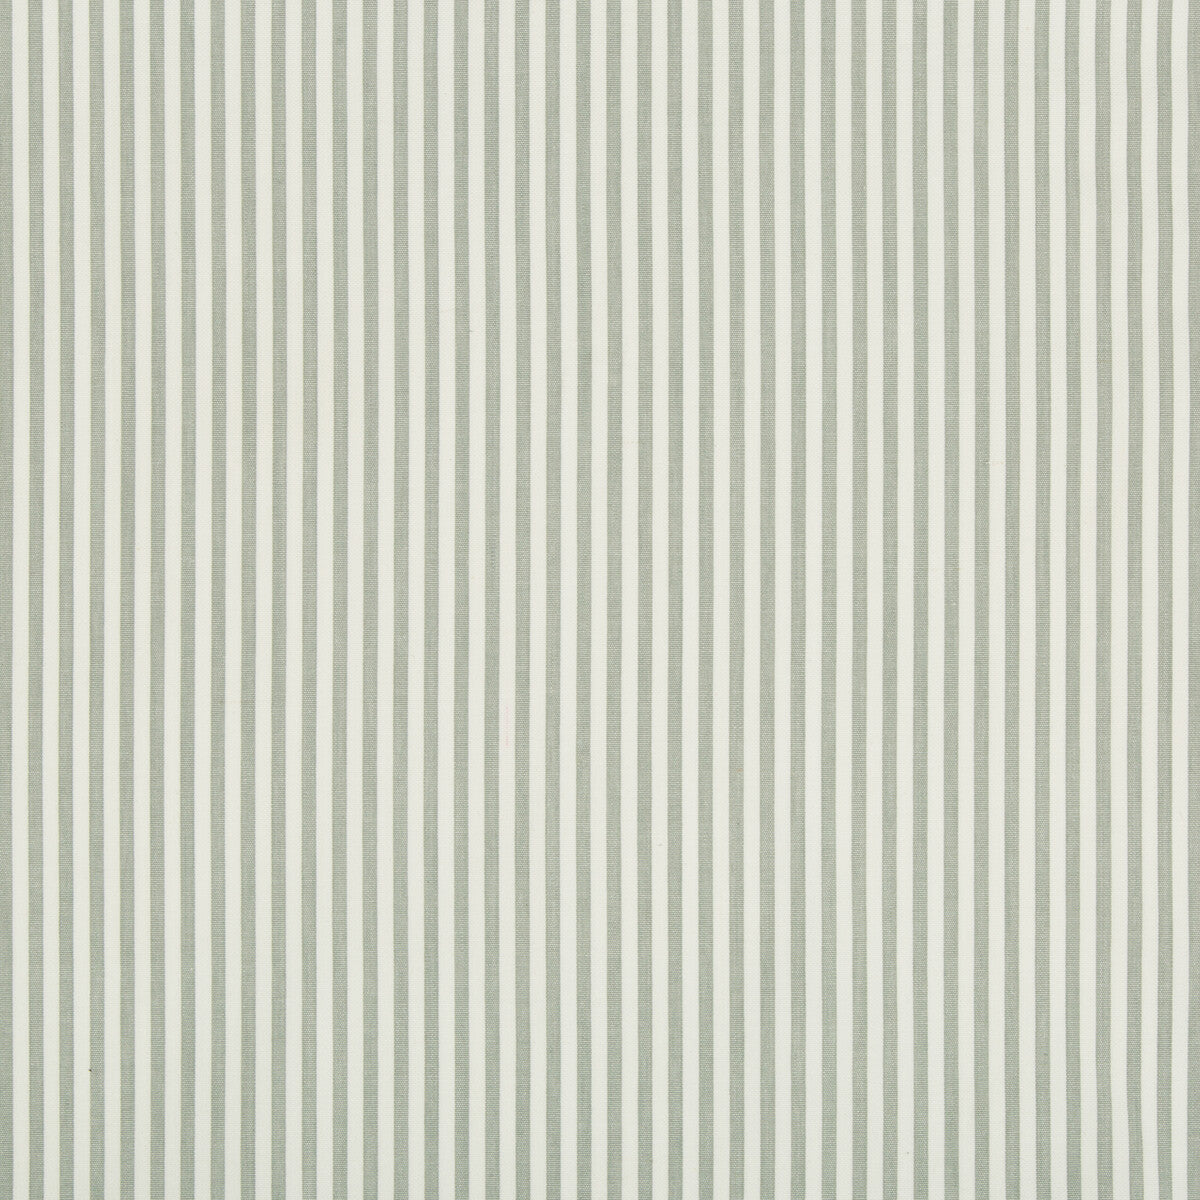 Cap Ferrat Stripe fabric in mineral color - pattern 2018146.113.0 - by Lee Jofa in the Suzanne Kasler The Riviera collection